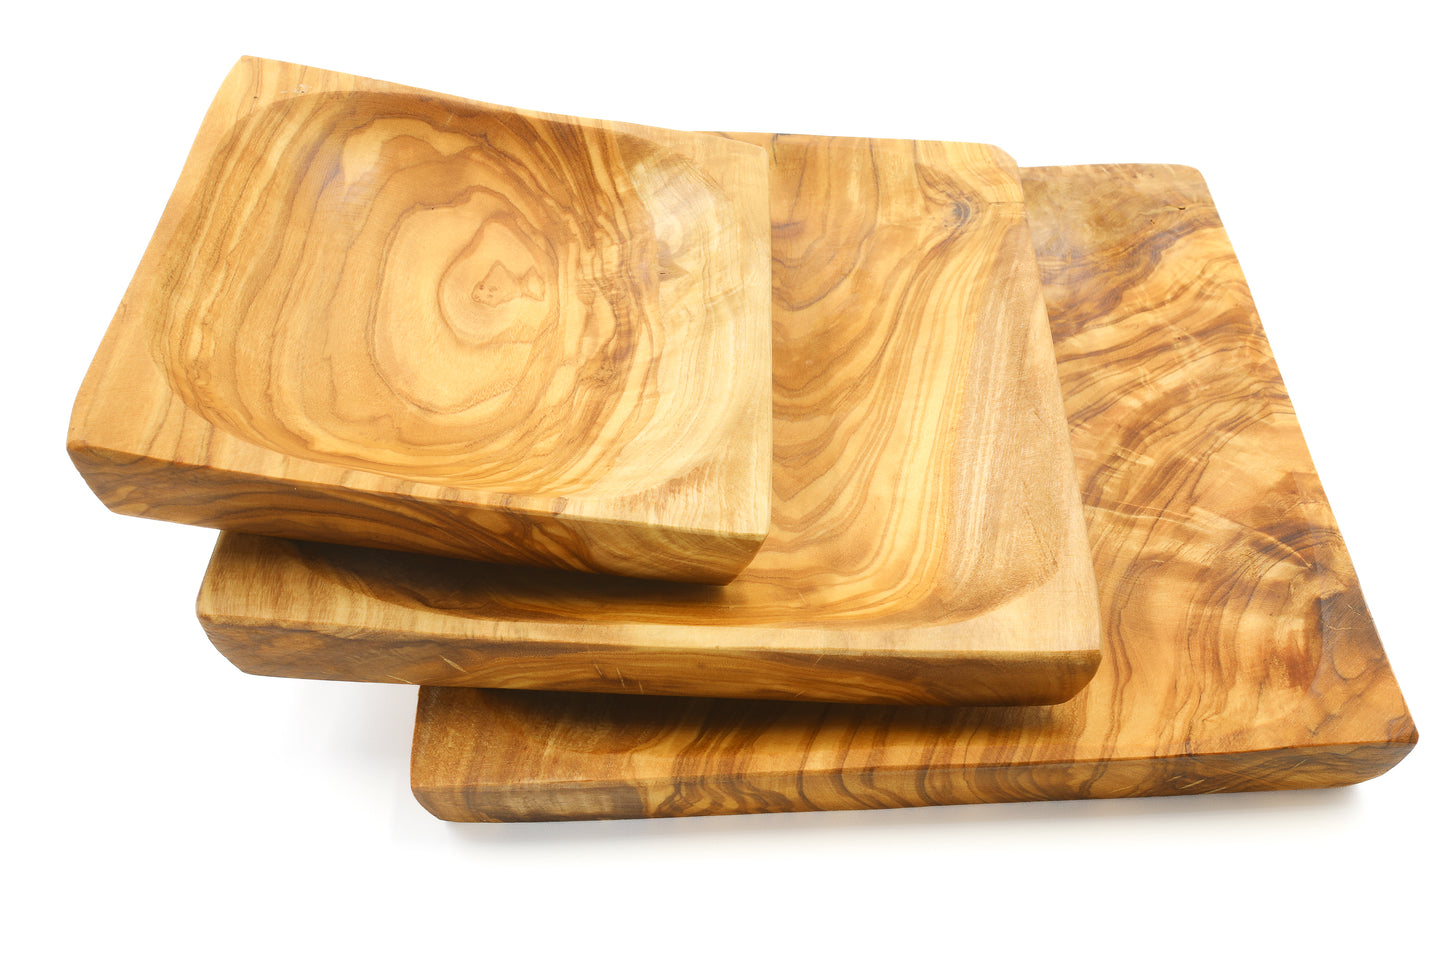 Classic olive wood square plates and rectangular dishes